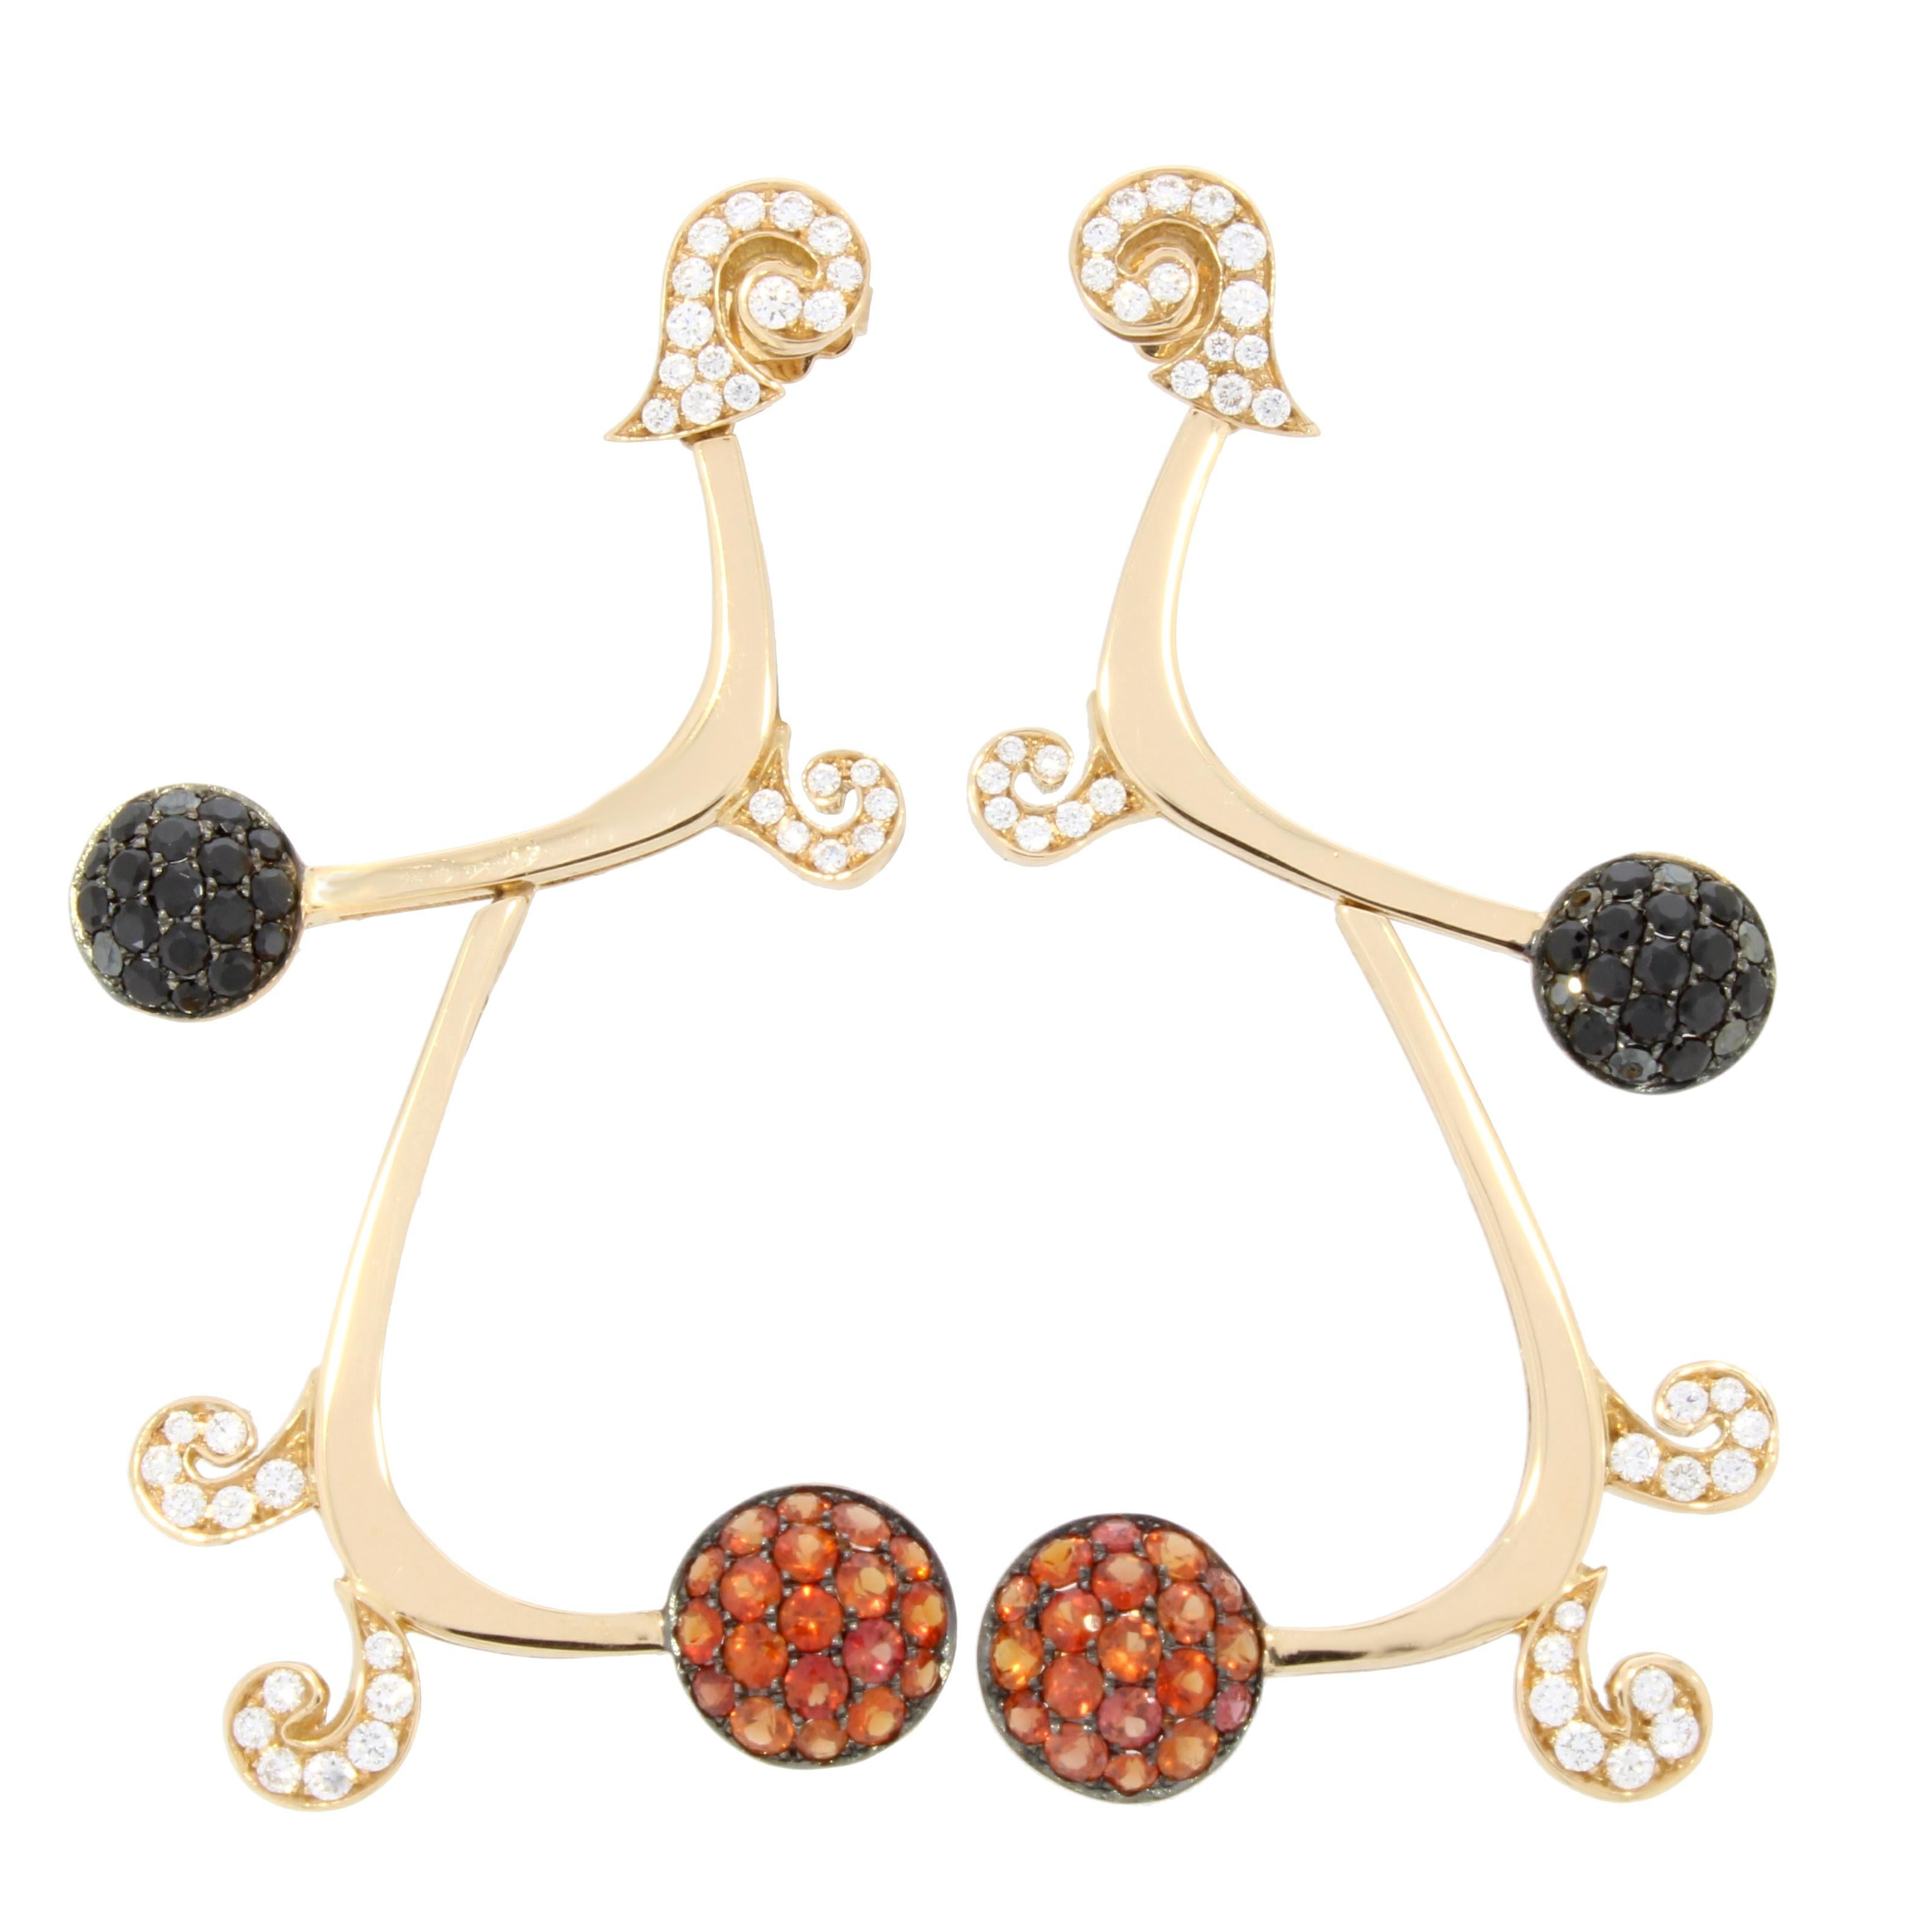 Contemporary 18 Karat Gold Orange Sapphires Black Spinel and Diamonds Earrings by Niquesa For Sale